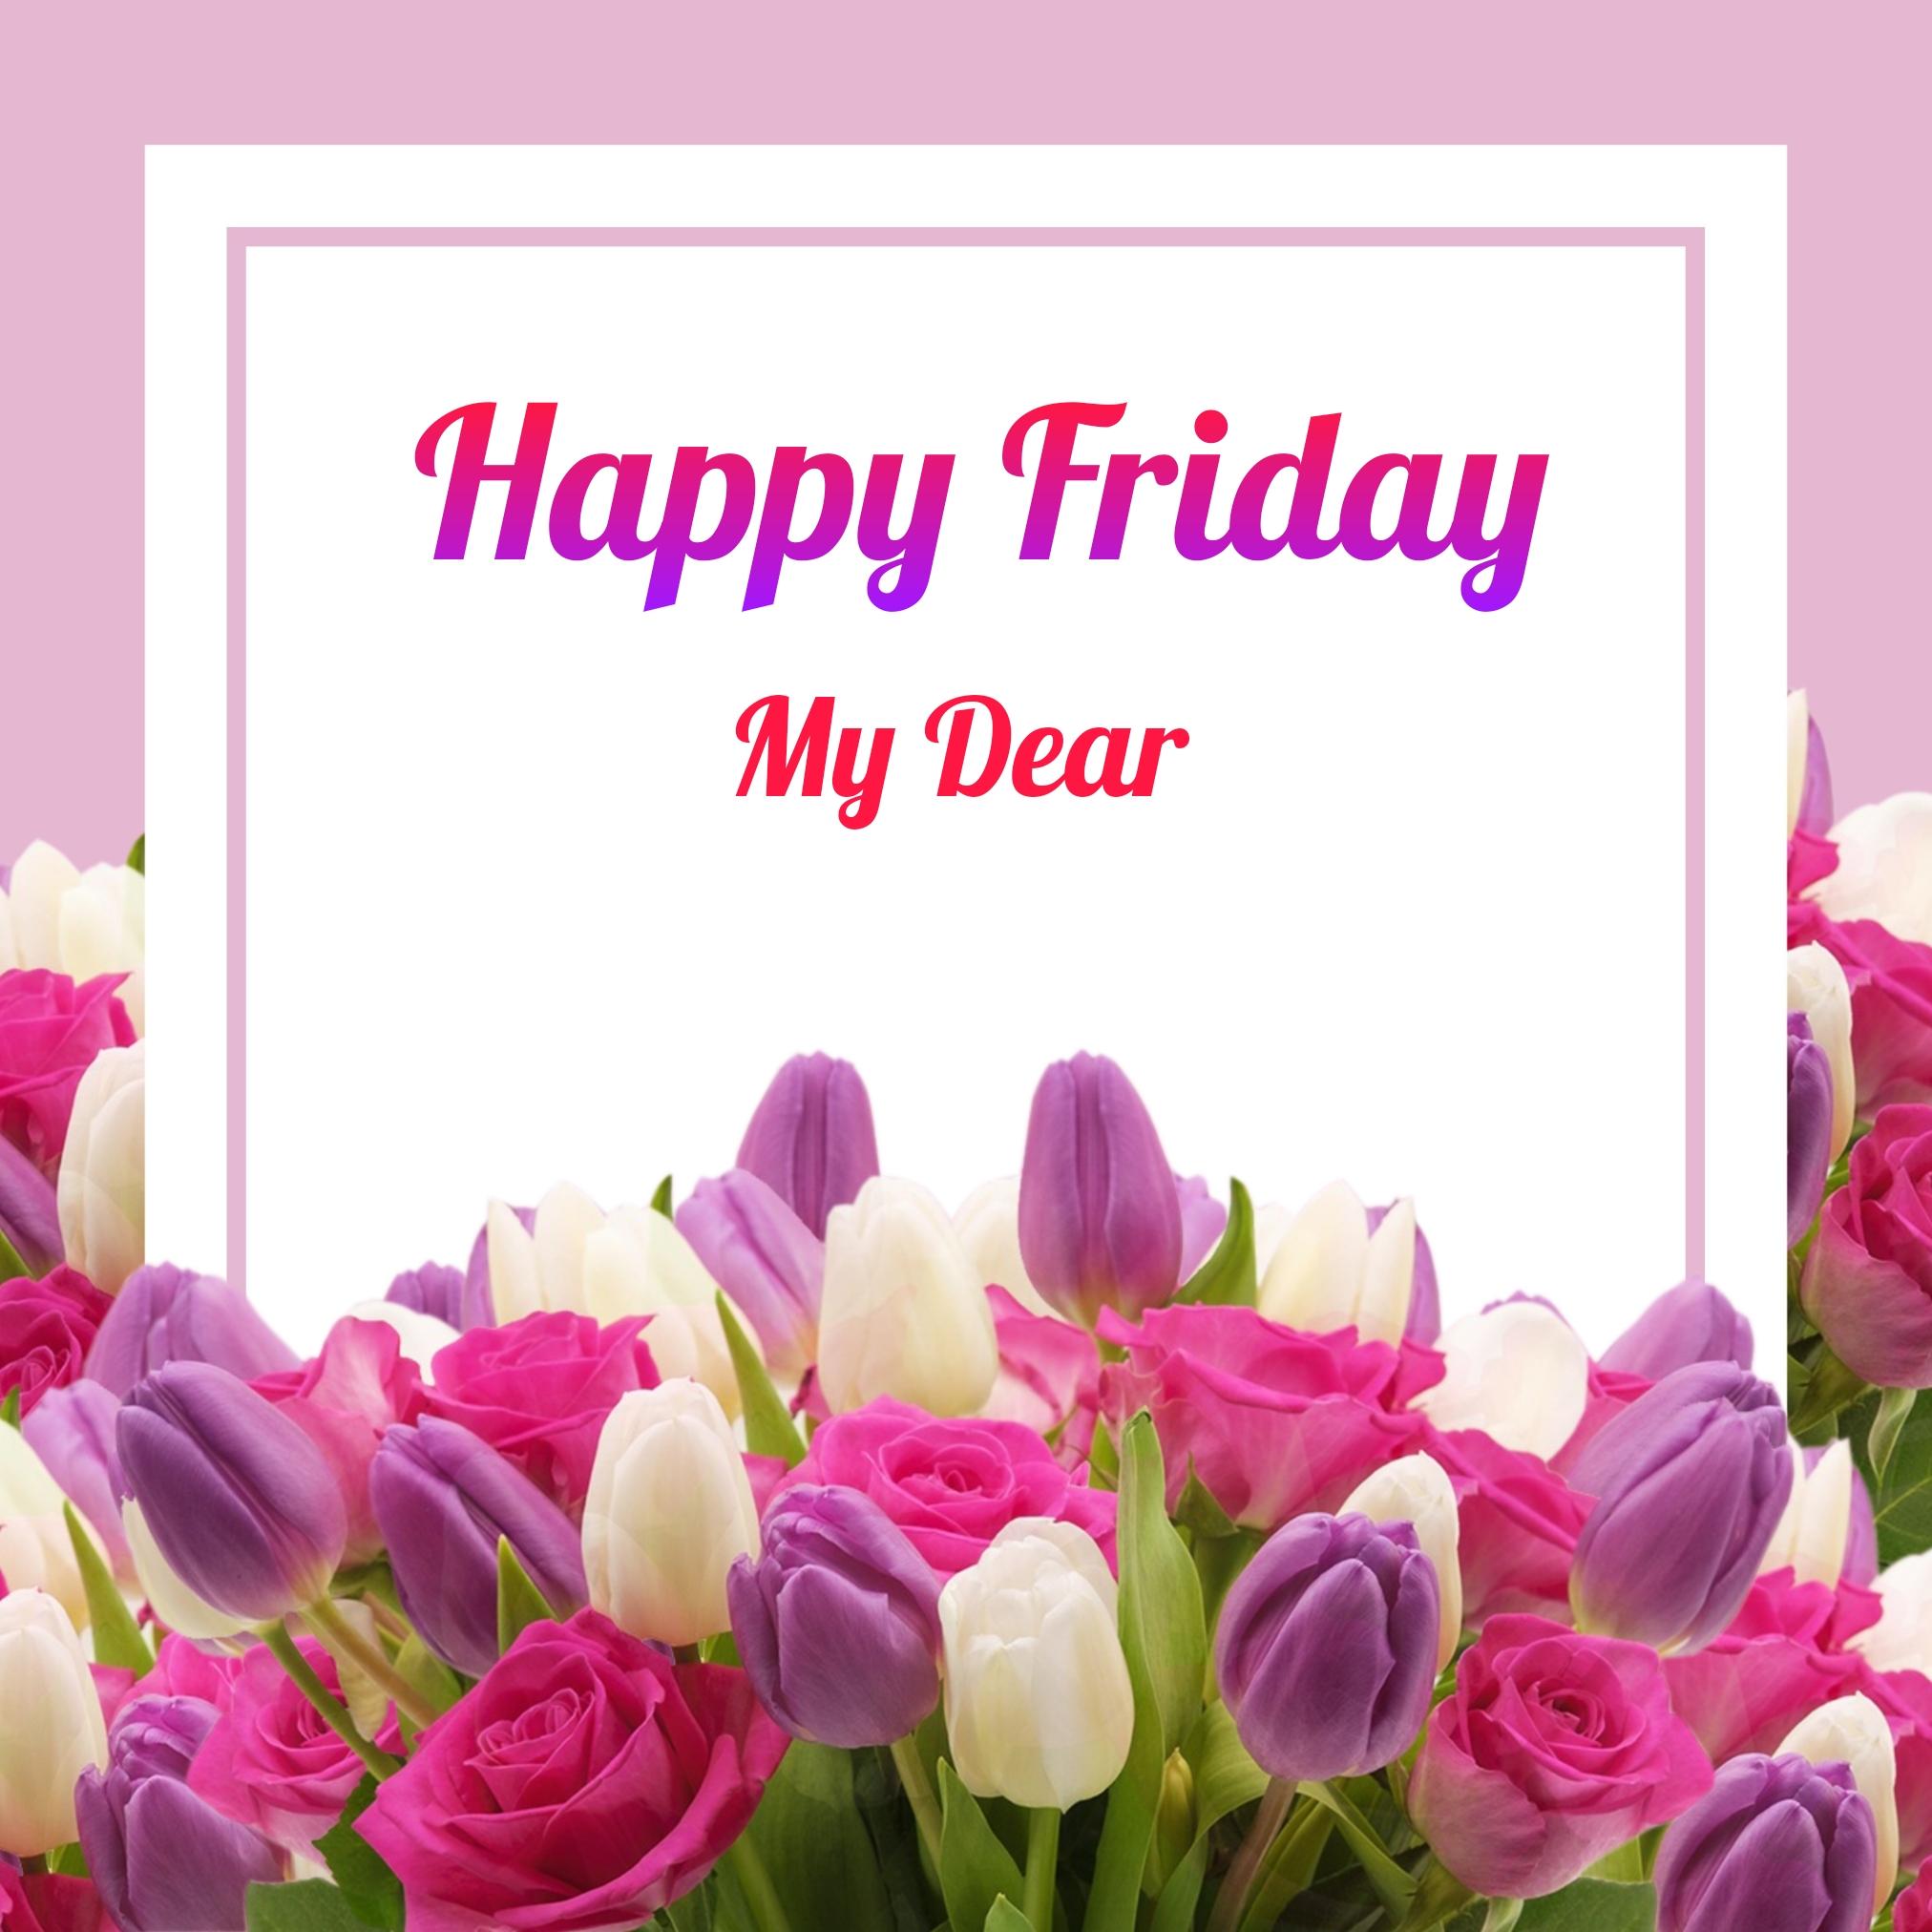 Happy Friday My Dear Images